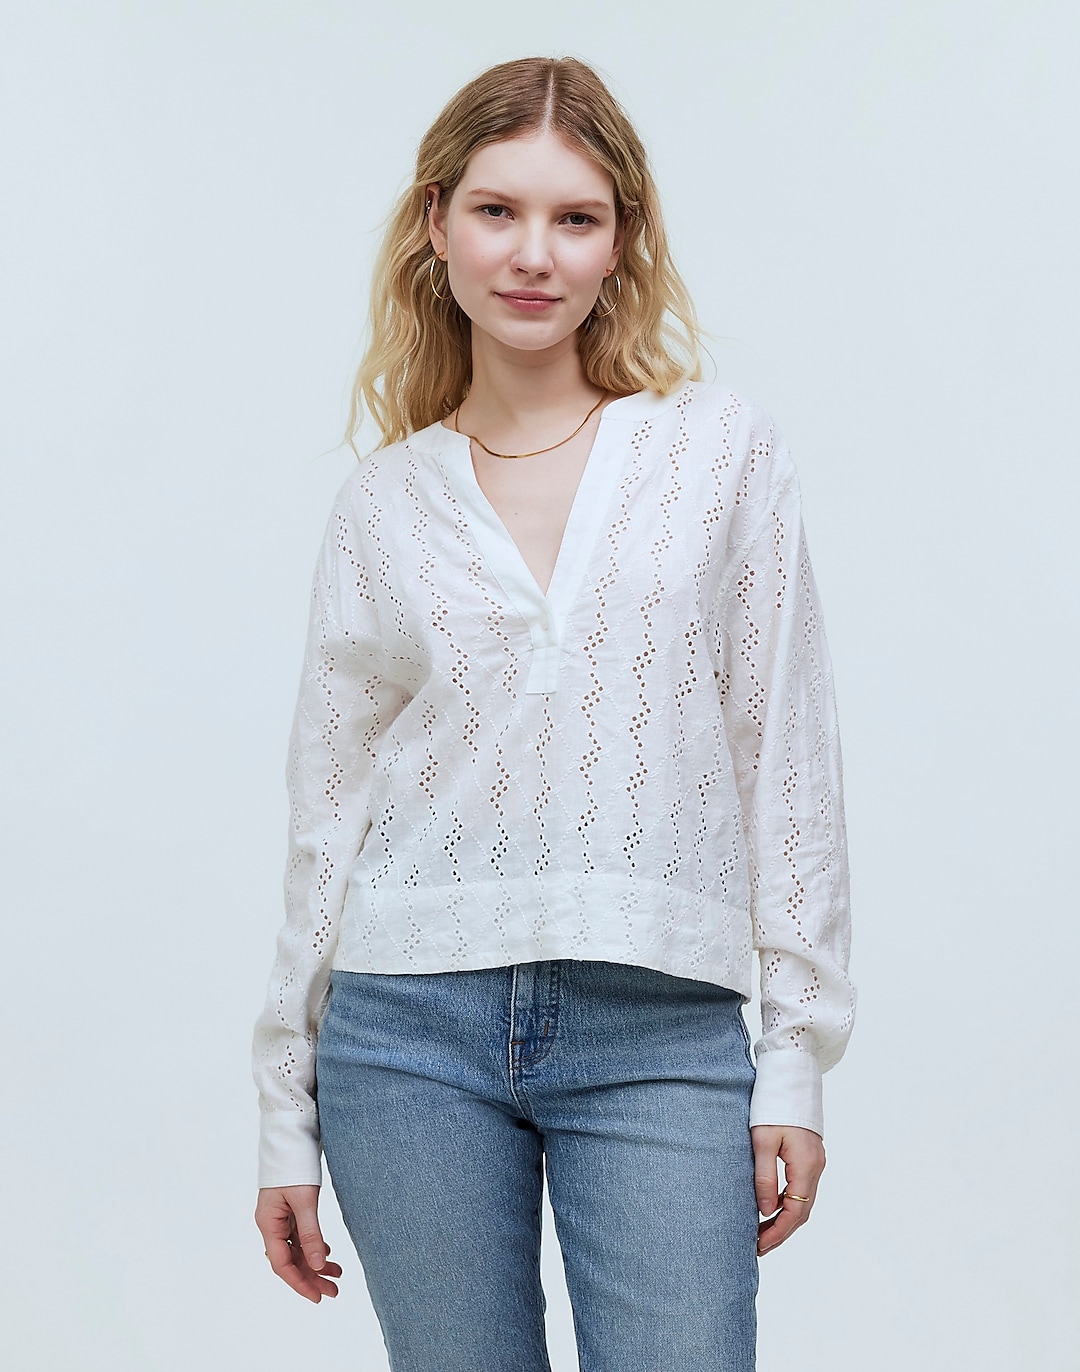 Long-Sleeve Popover Top in Eyelet | Madewell